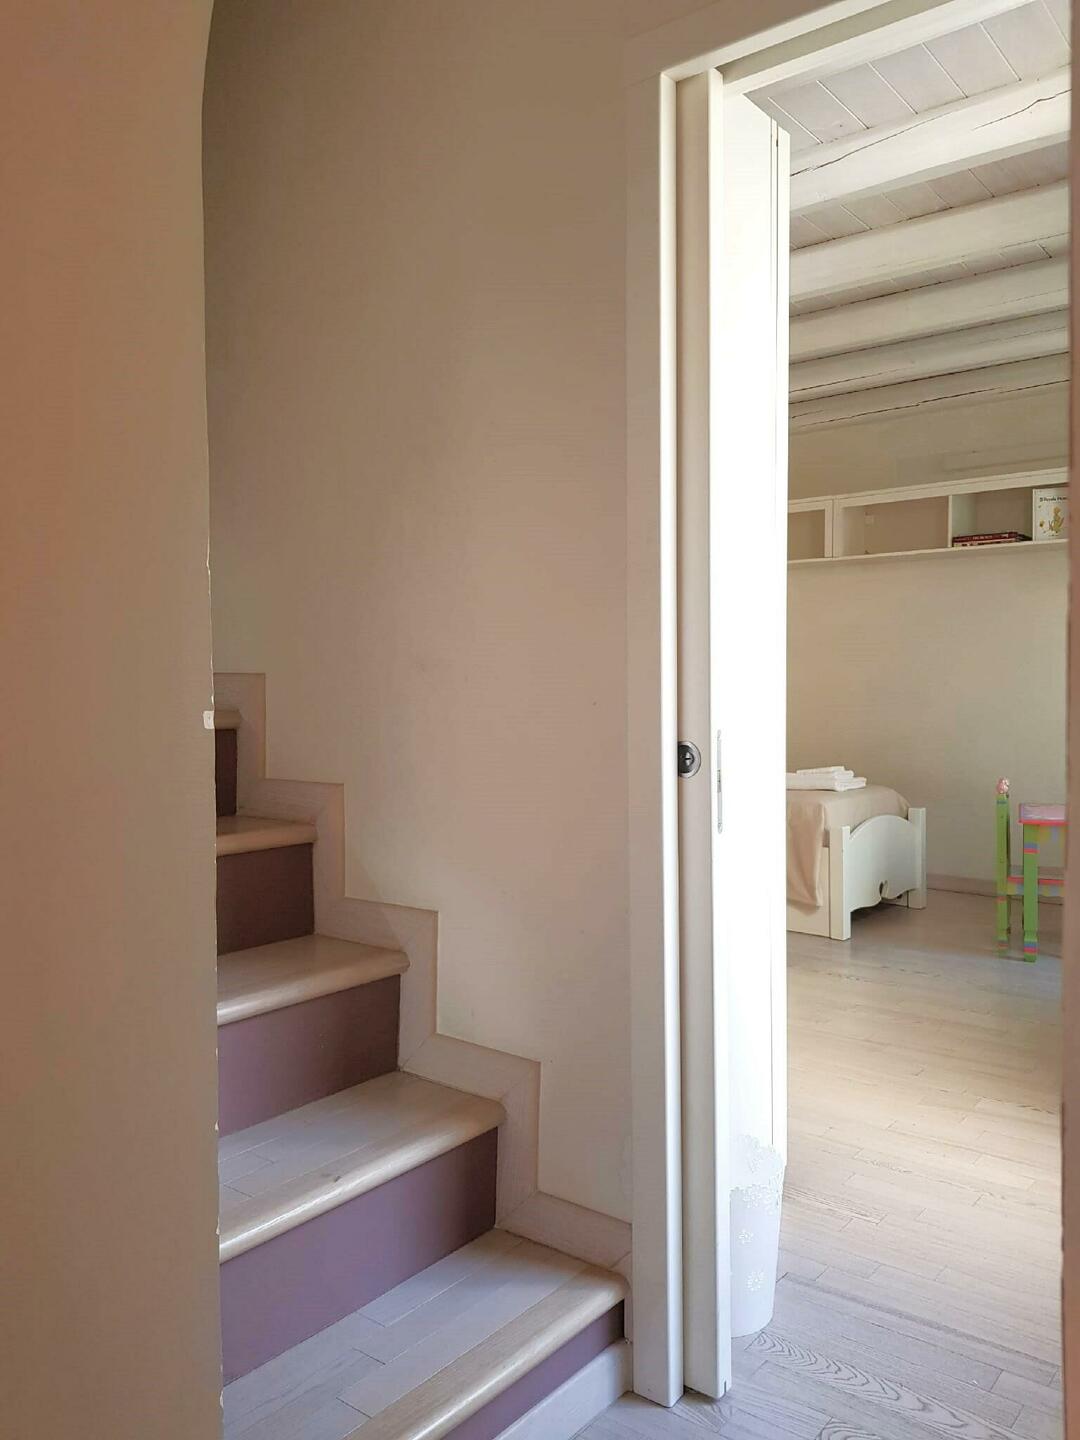 Staircase to double bedroom